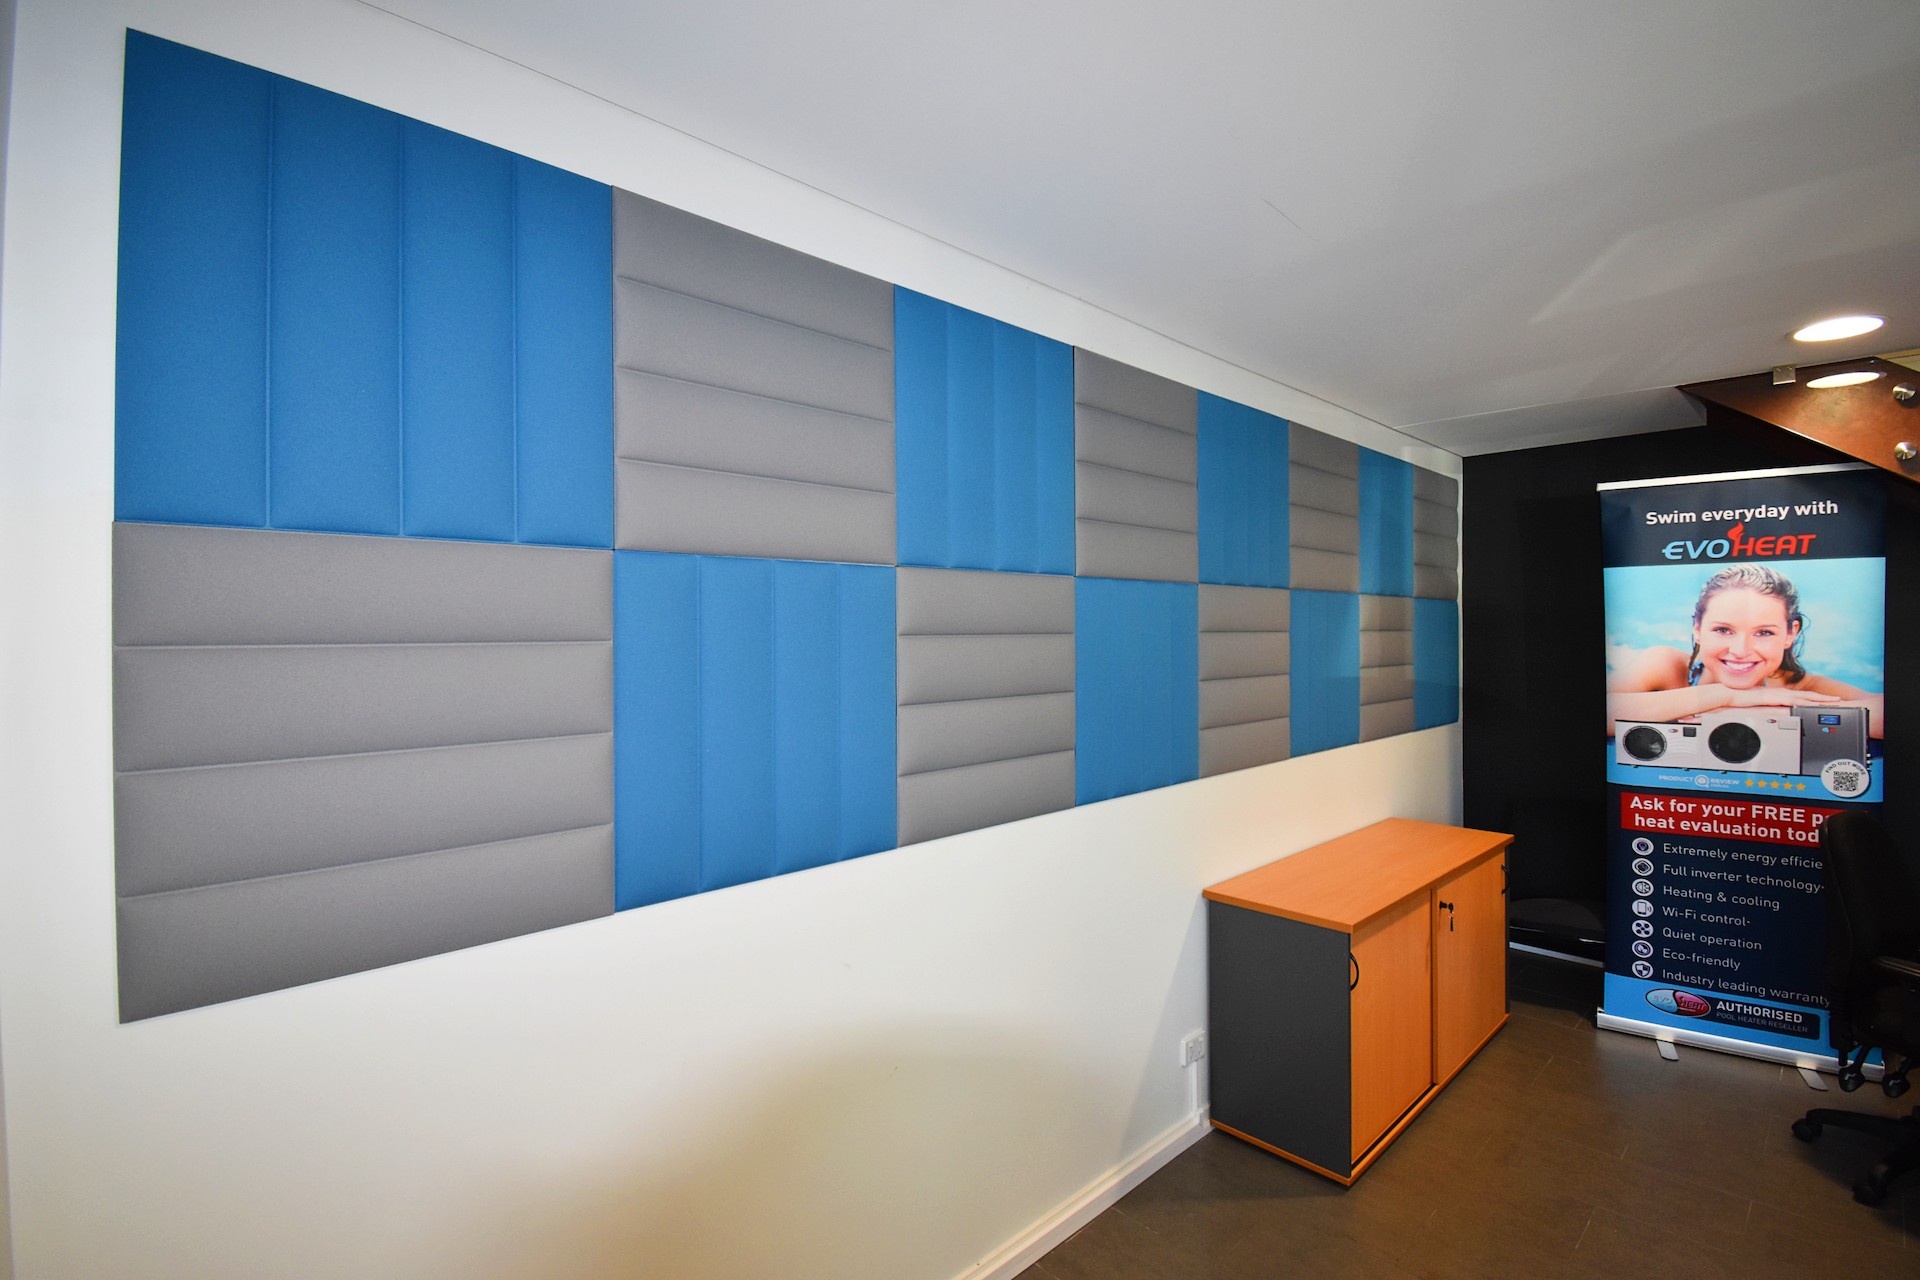 Acoustic wall tiles